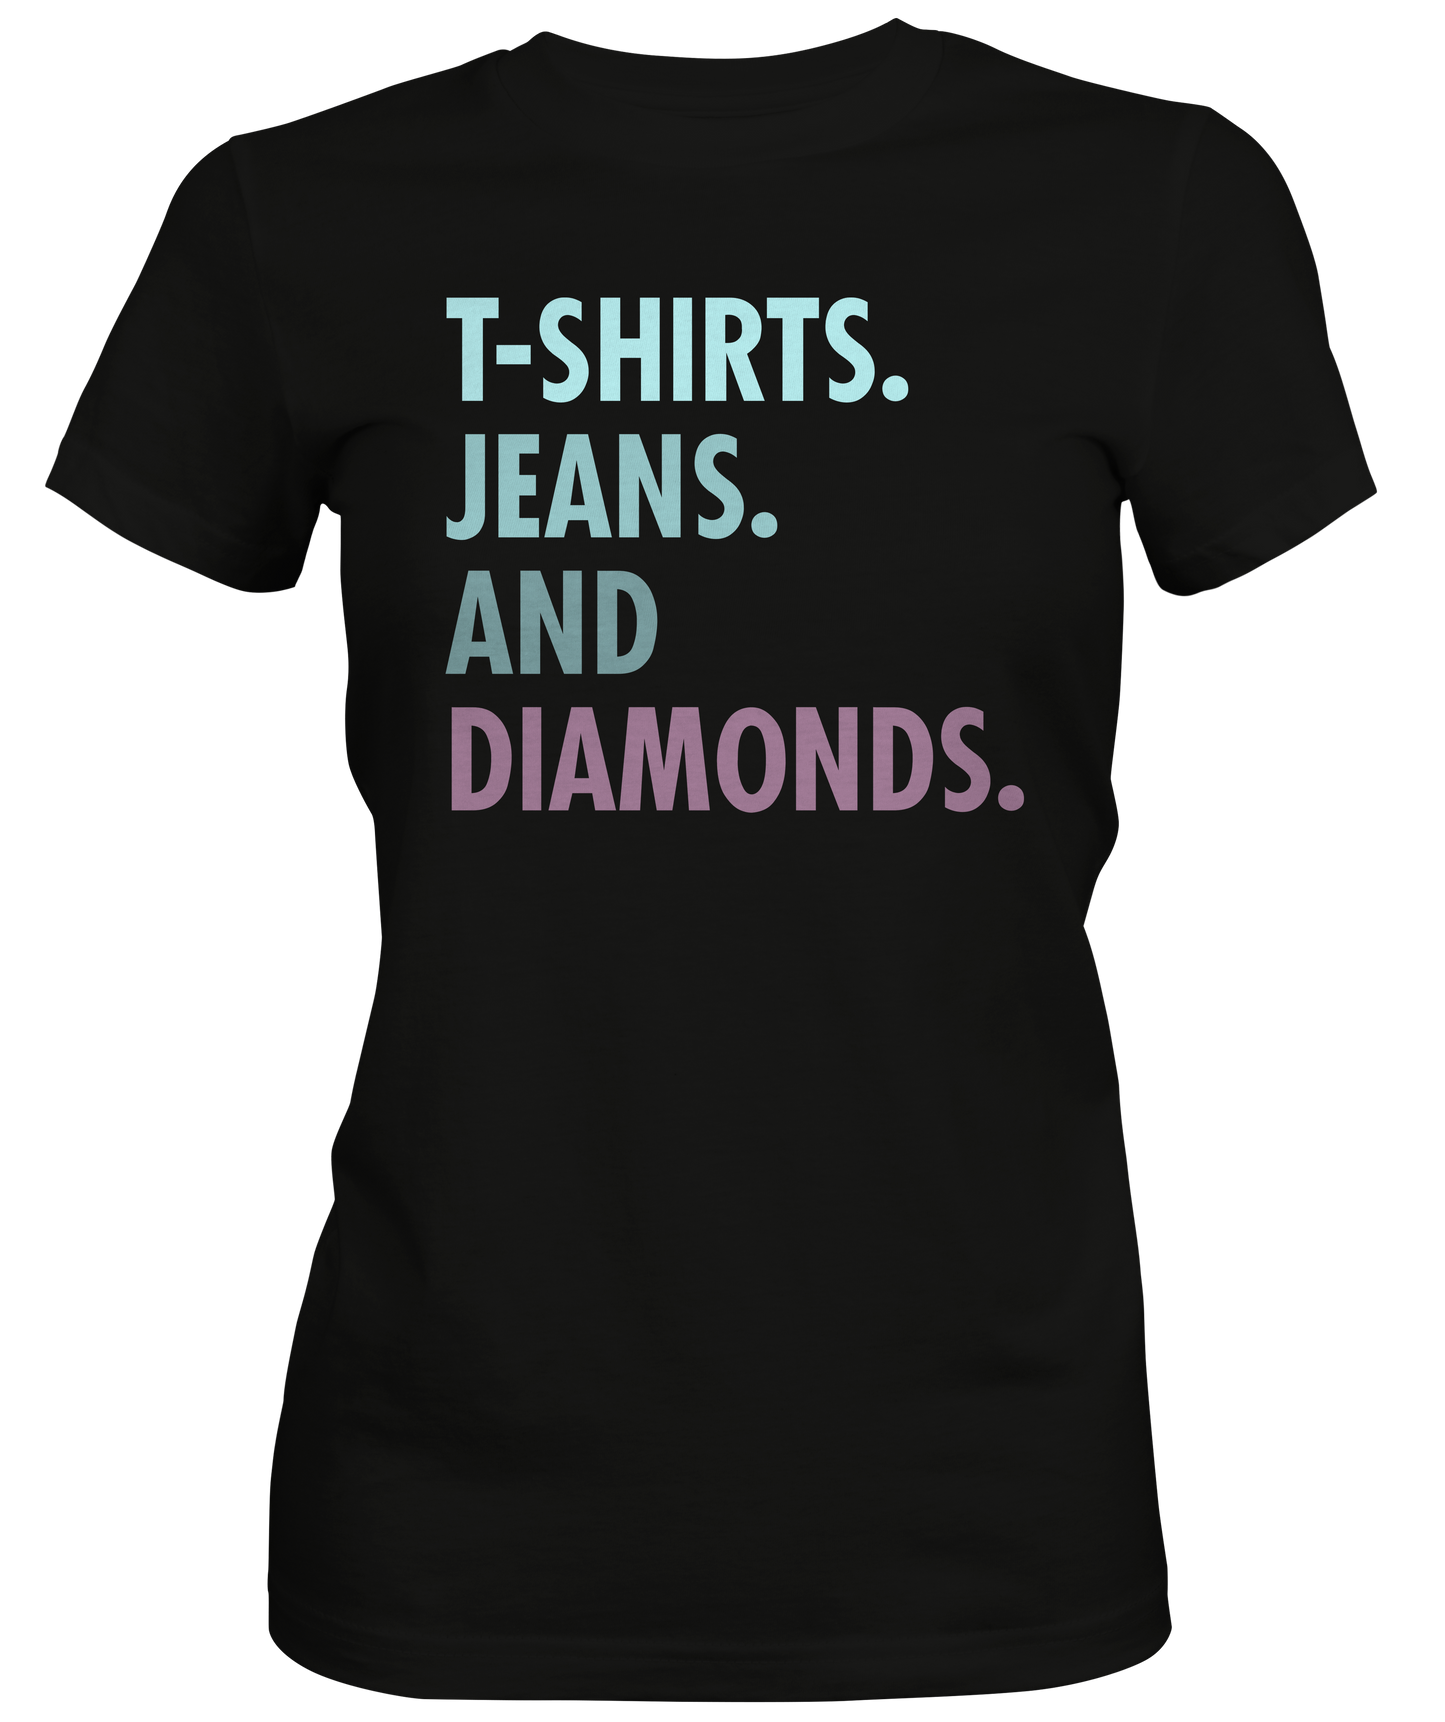 Jeans and Diamonds Ladies T-shirt for Sale